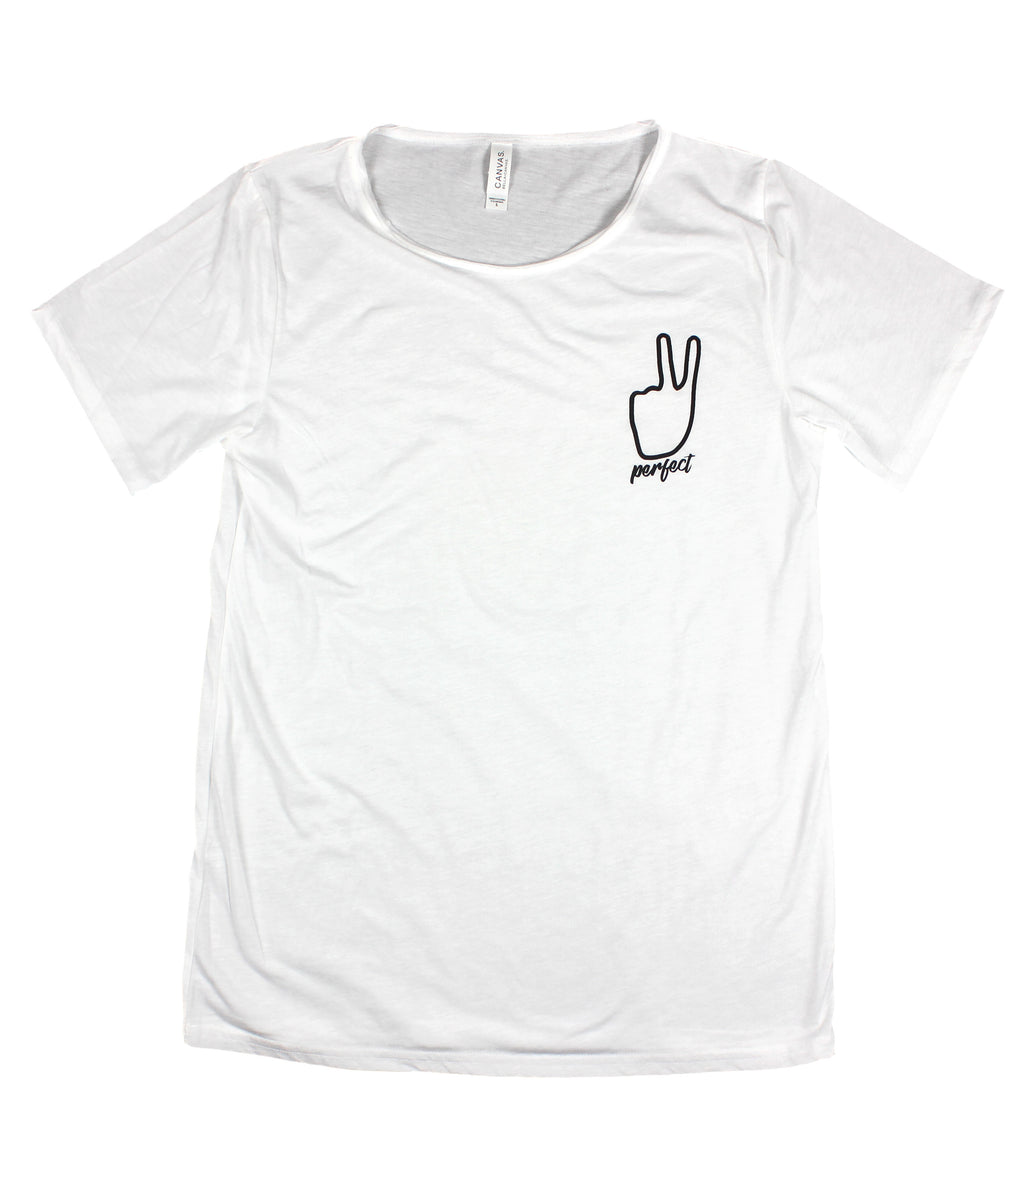 PERFECT PEACE WHITE RAW NECK T-SHIRT